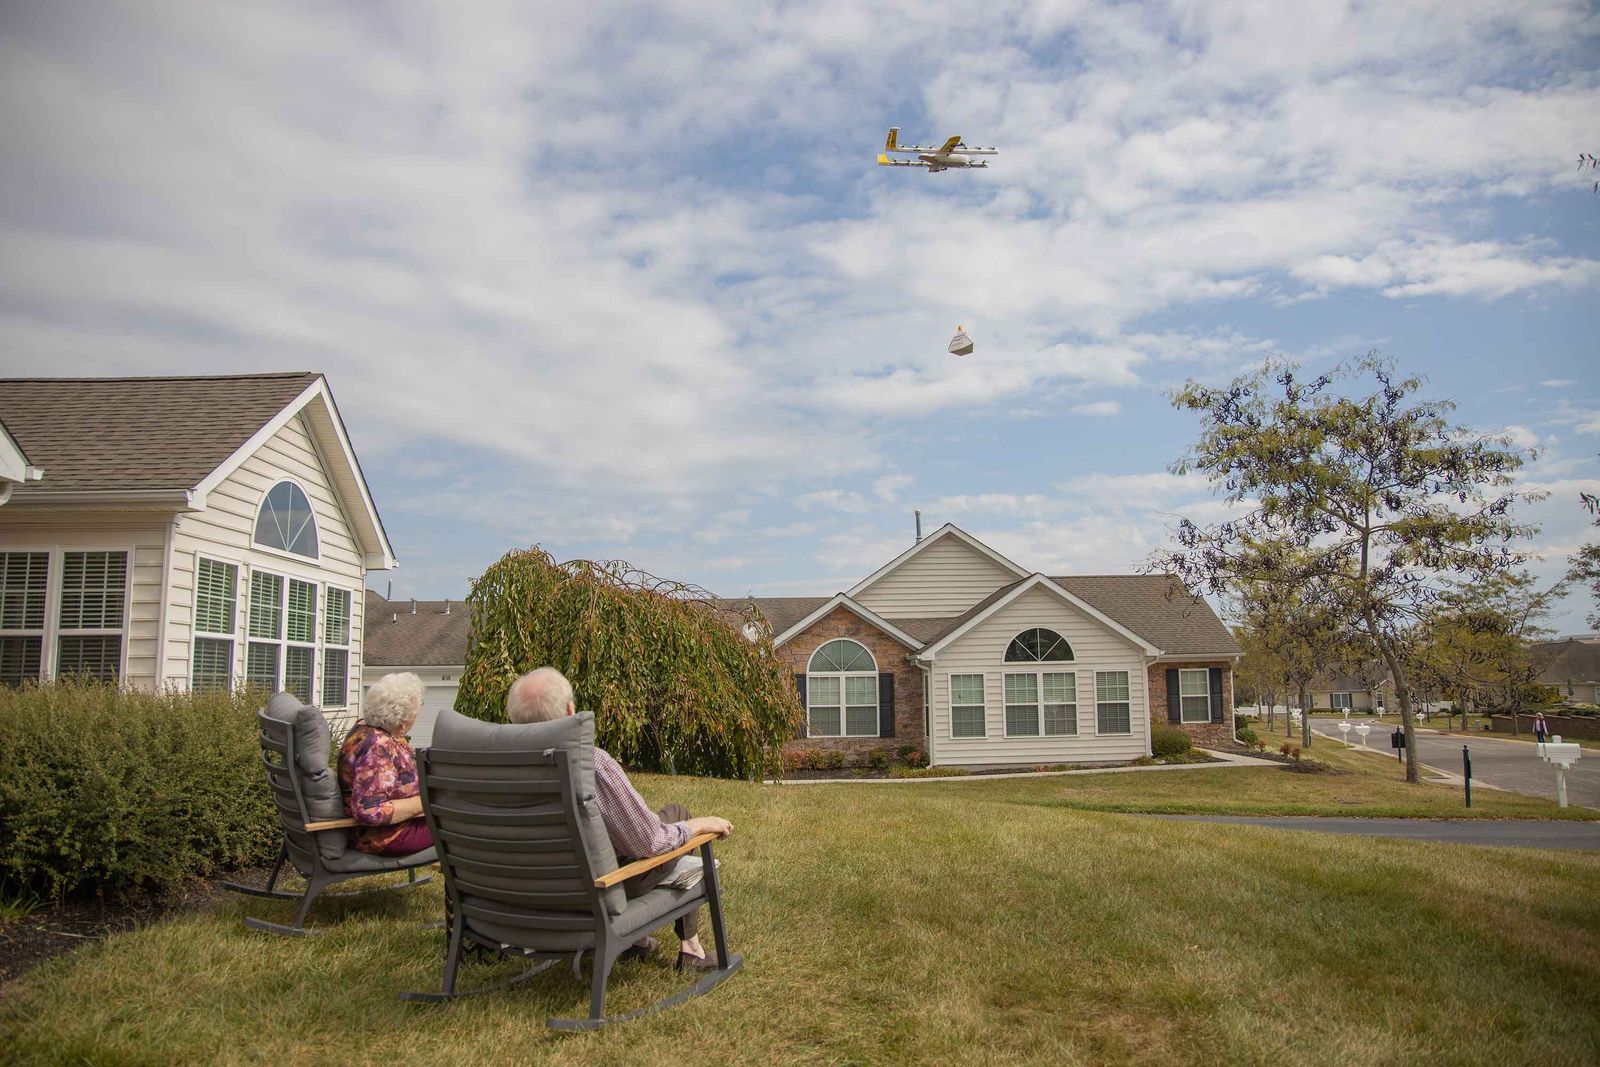 This Drone Made the First Home Delivery in the United States